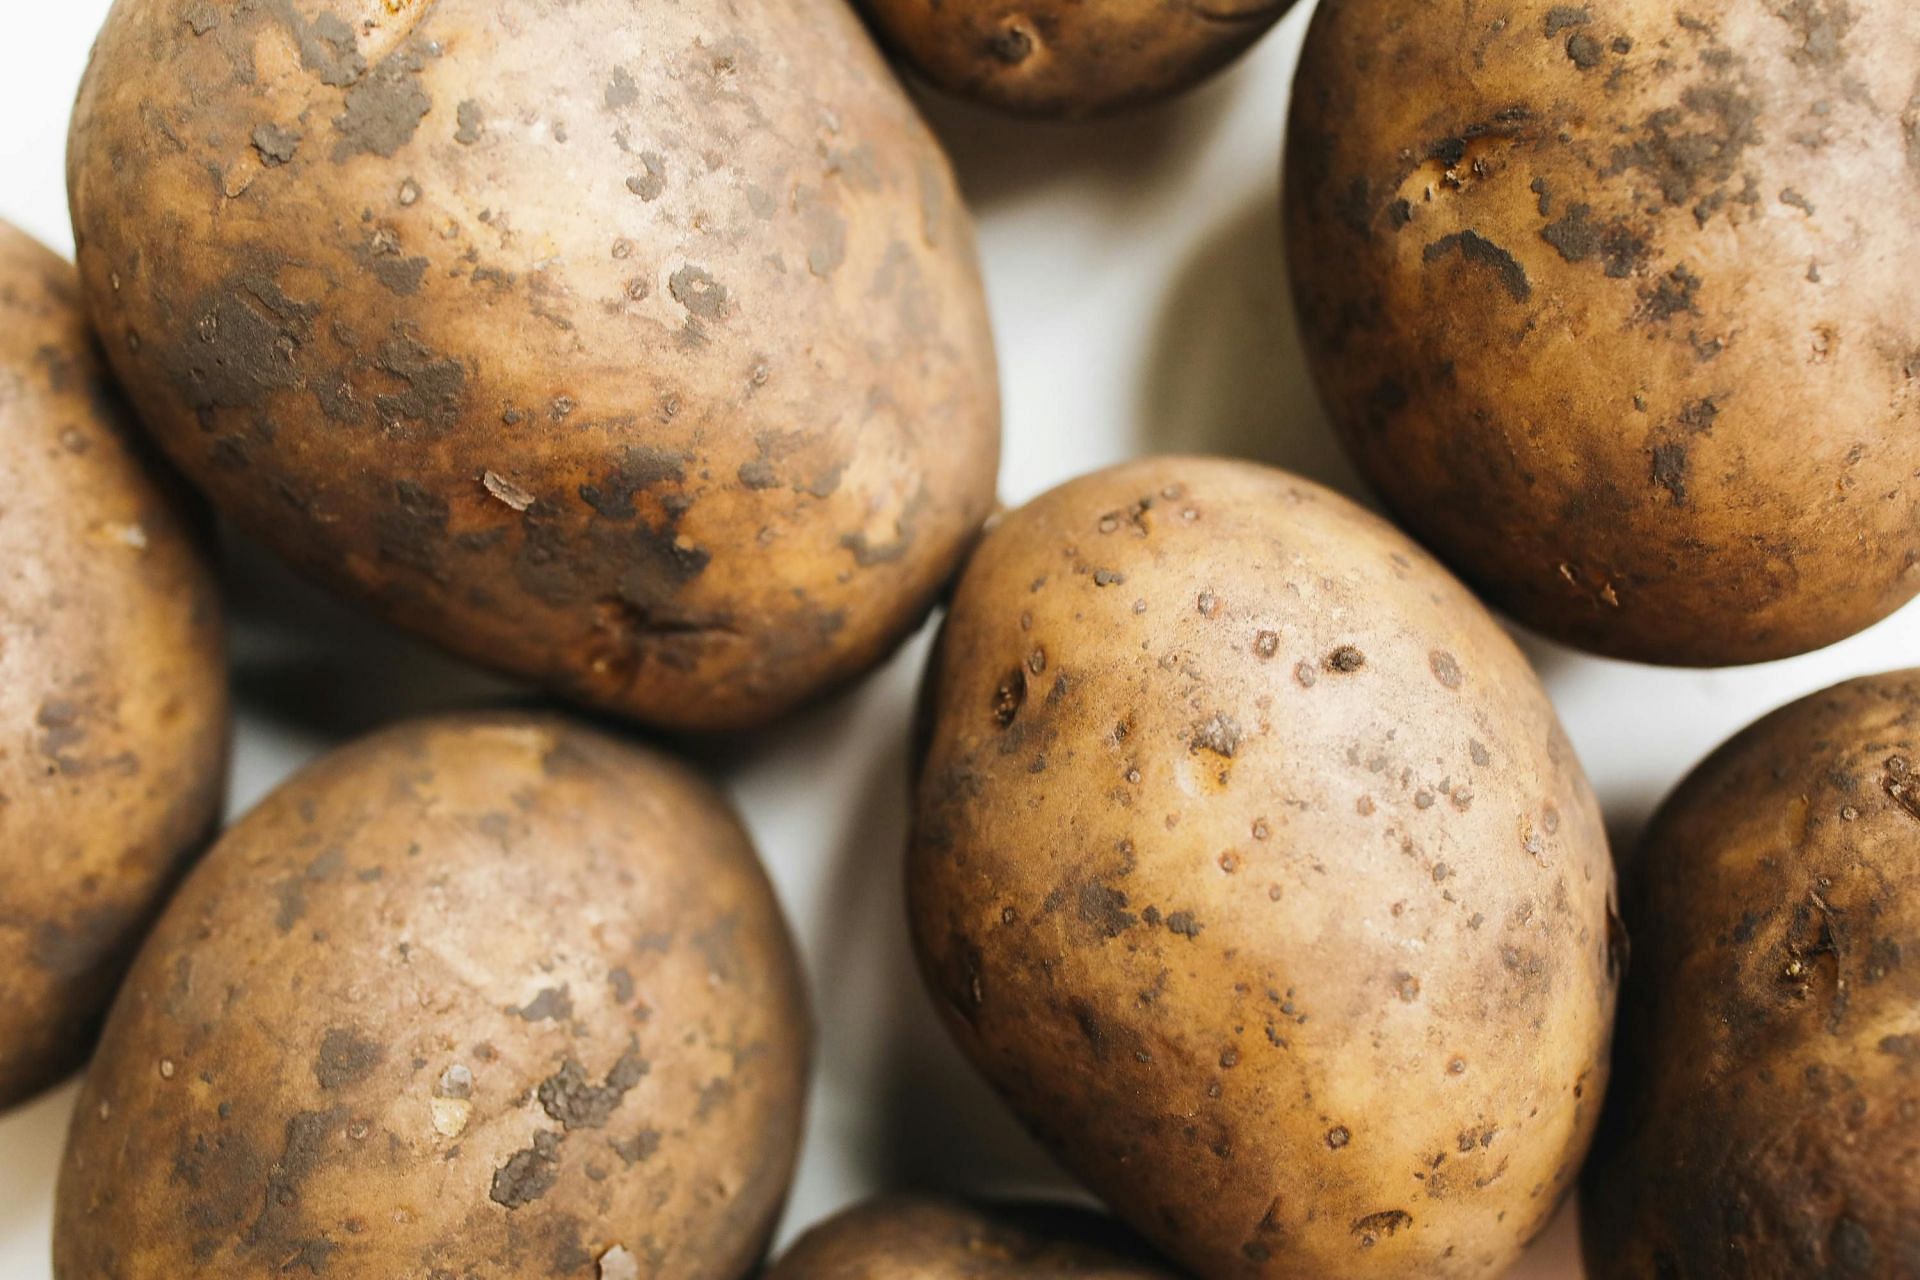 healthiest potatoes (image sourced via Pexels / Photo by polina)